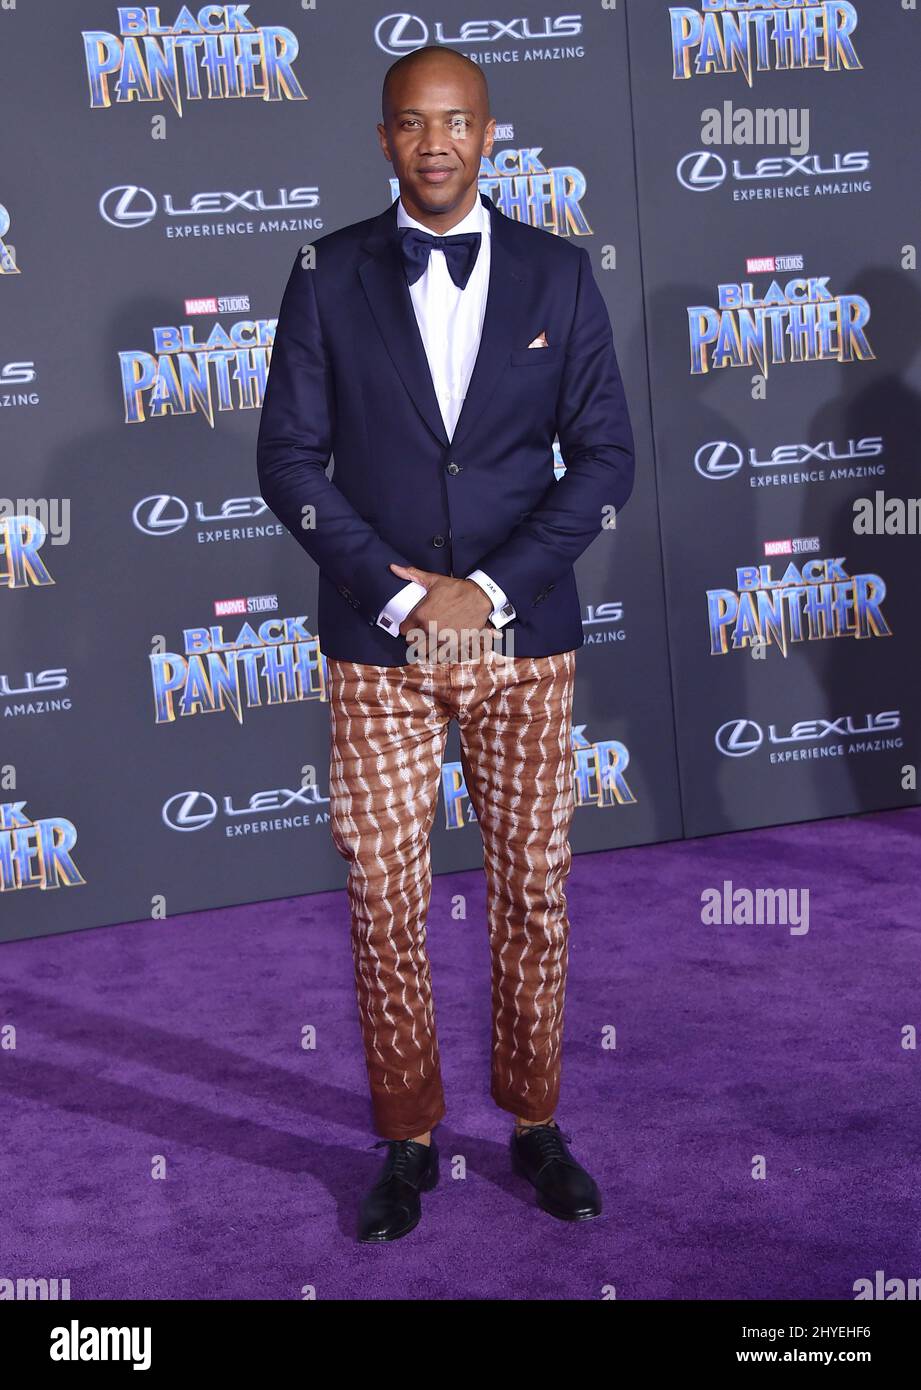 J. August Richards at the 'Black Panther' premiere held at the Dolby Theatre on January 29, 2018 in Hollywood, USA. Stock Photo